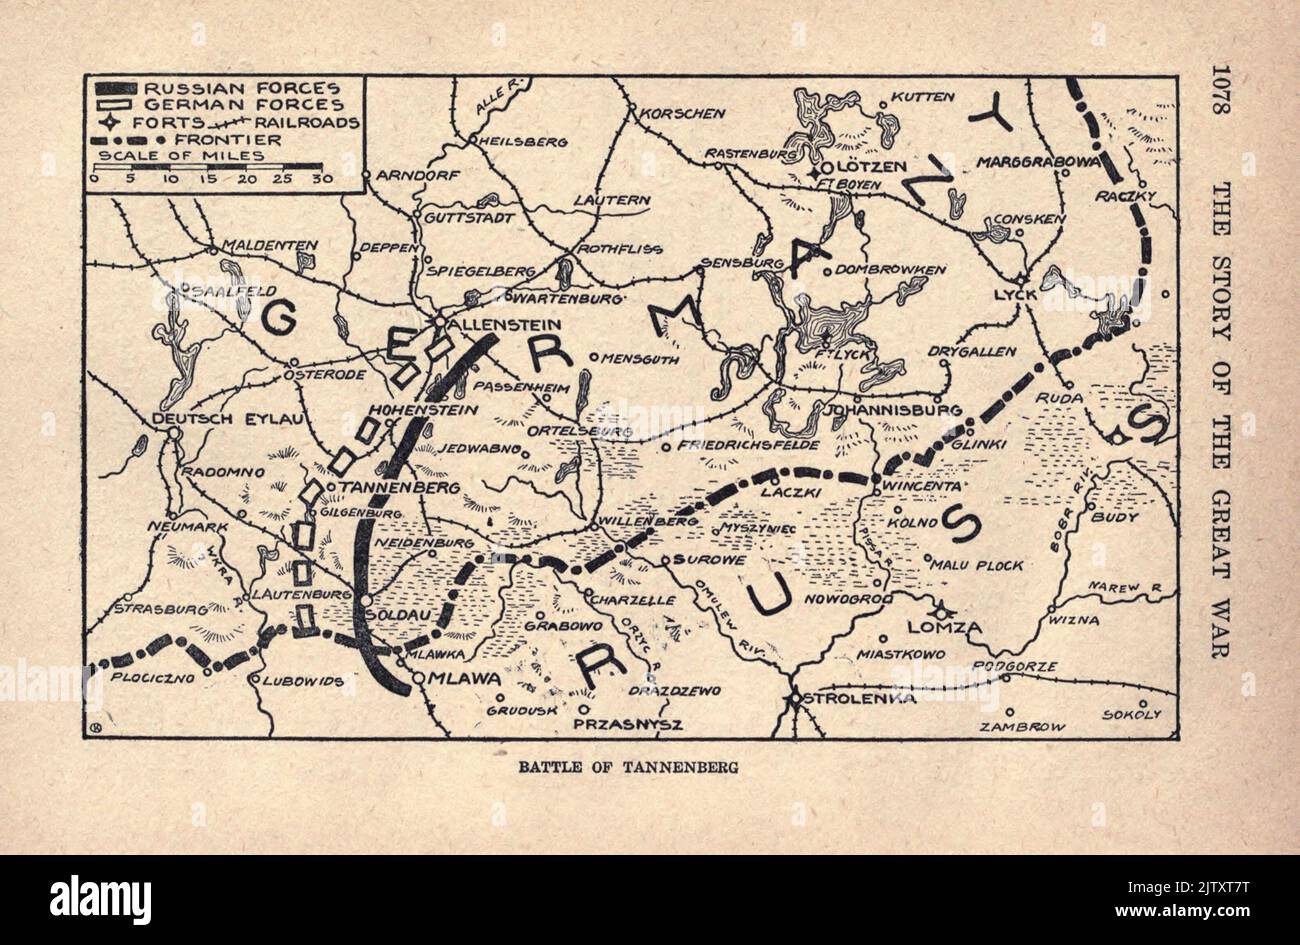 Map of the BATTLE OF TANNENBERG from the book The story of the great war; the complete historical records of events to date DIPLOMATIC AND STATE PAPERS by Reynolds, Francis Joseph, 1867-1937; Churchill, Allen Leon; Miller, Francis Trevelyan, 1877-1959; Wood, Leonard, 1860-1927; Knight, Austin Melvin, 1854-1927; Palmer, Frederick, 1873-1958; Simonds, Frank Herbert, 1878-; Ruhl, Arthur Brown, 1876-  Published 1920 Stock Photo